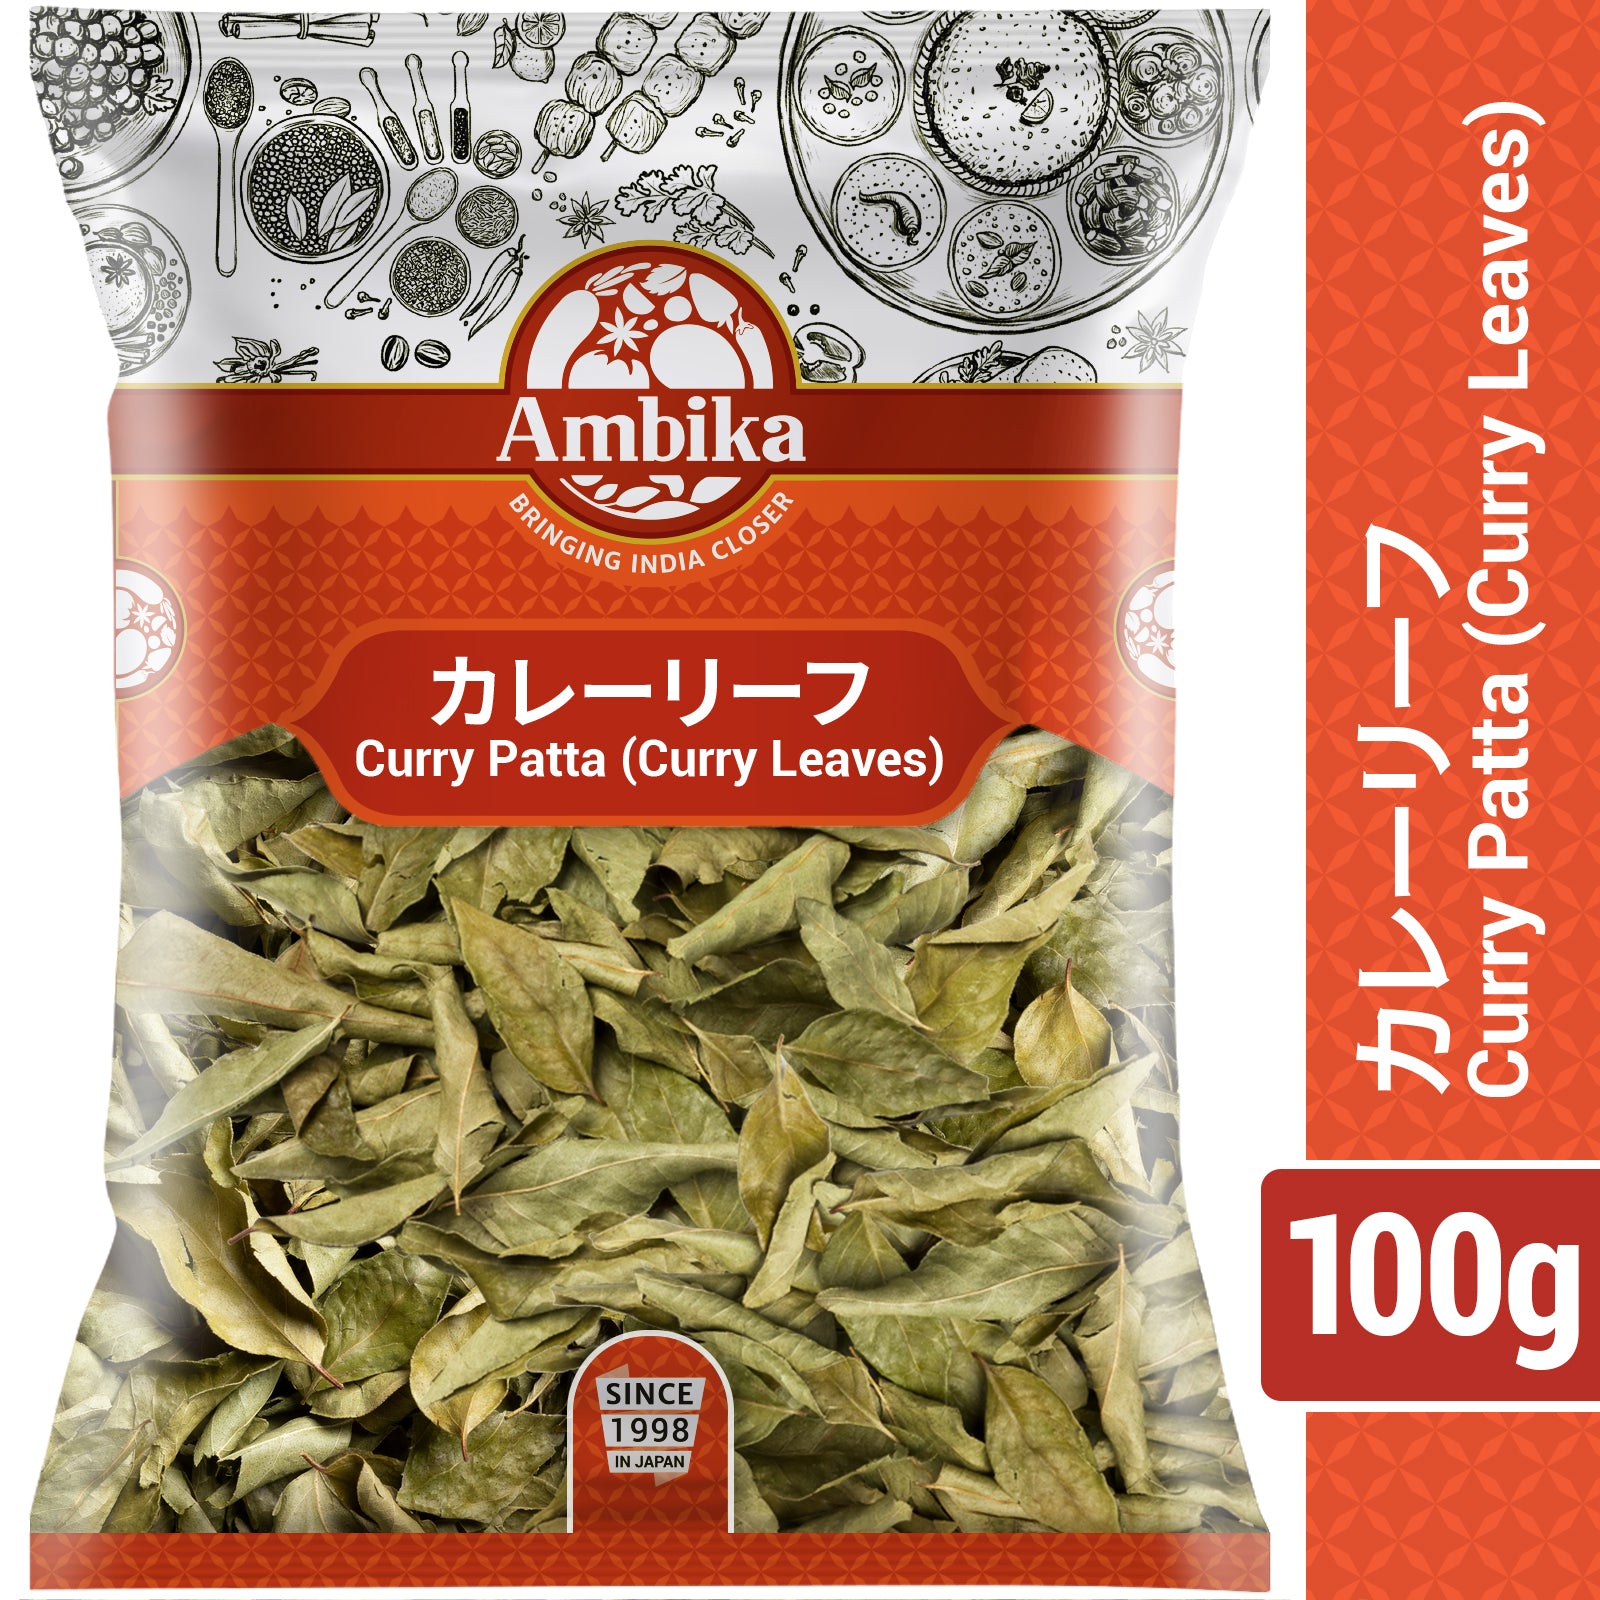 Ambika Curry Patta (Curry Leaves) 100g